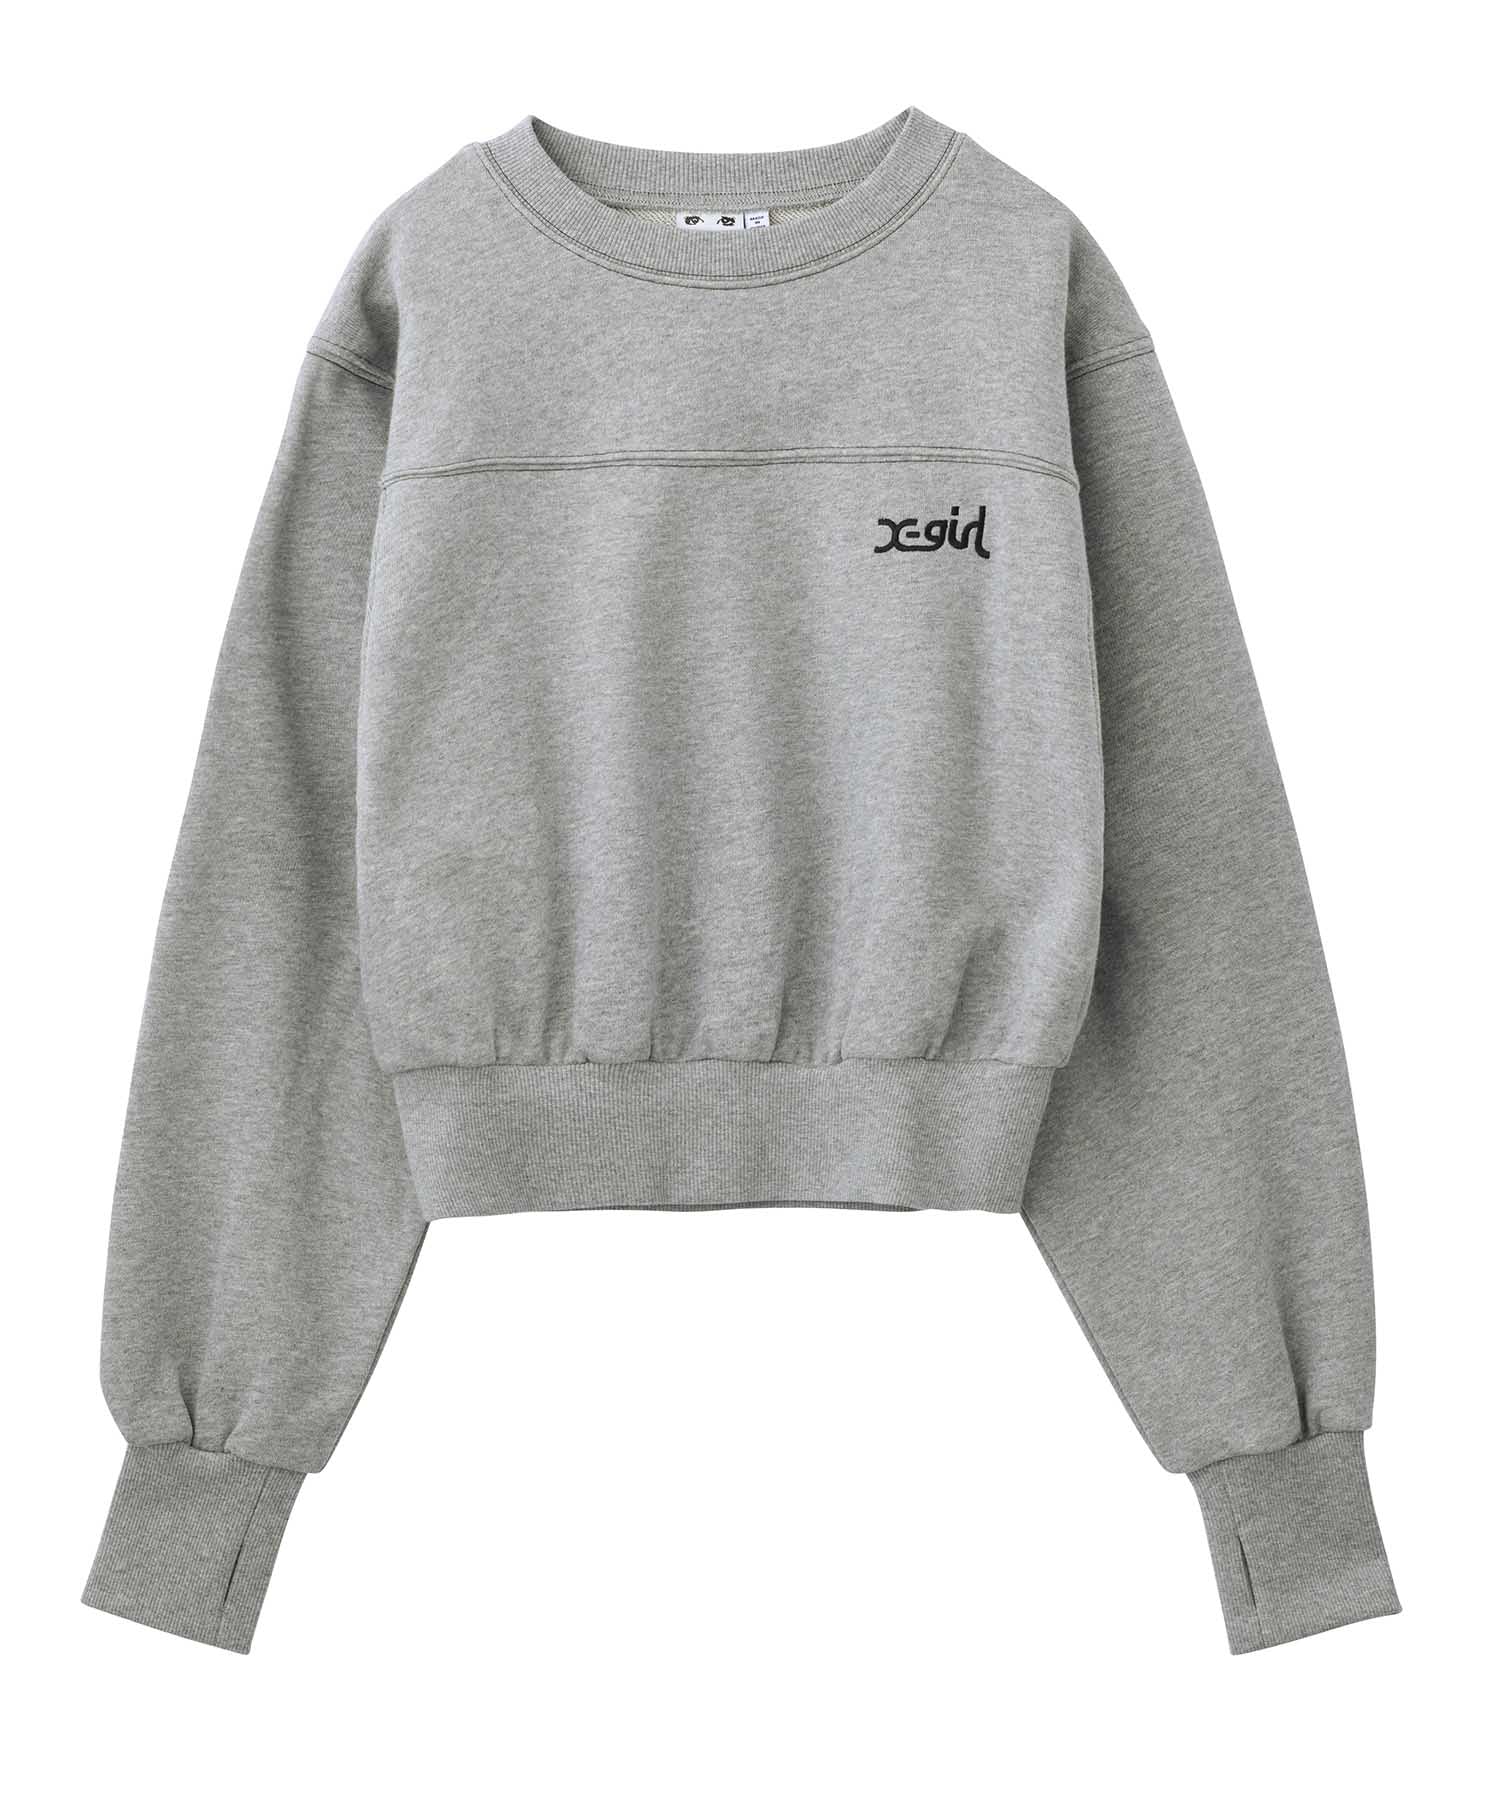 Shop the X-girl Compact Sweat Top - Real Girls' Streetwear at X